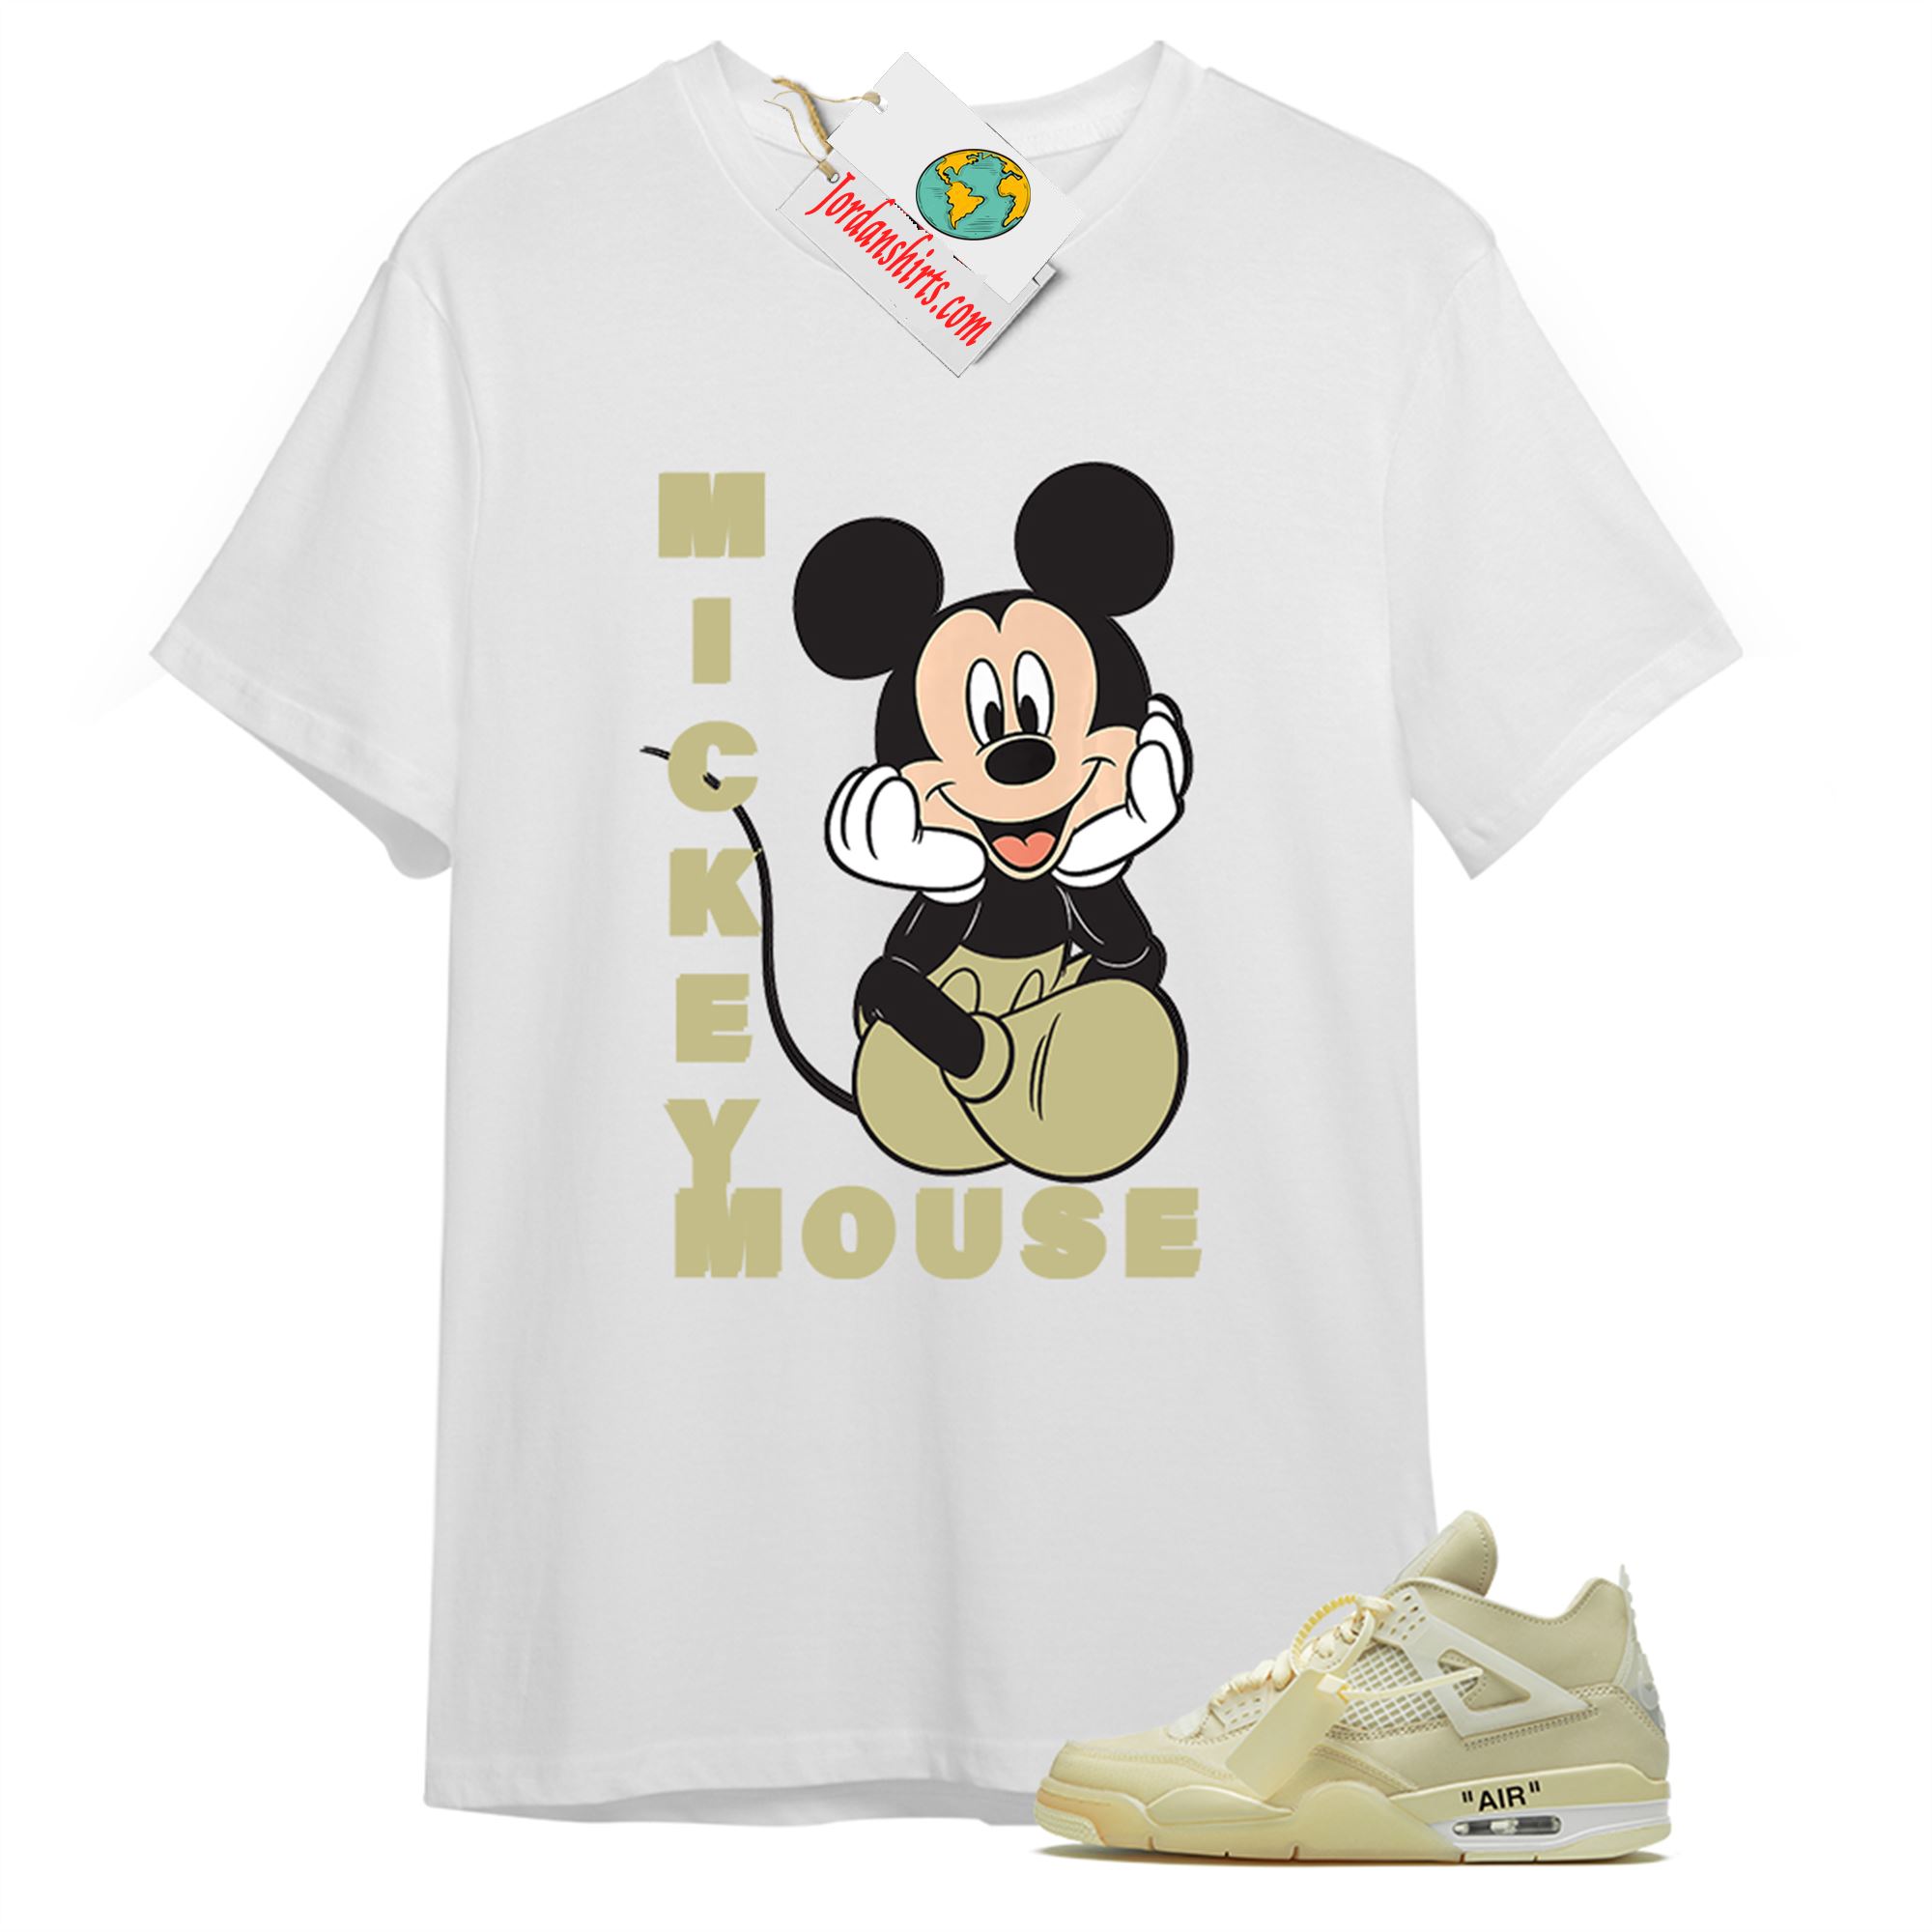 Jordan 4 Shirt, Disney Mickey Mouse Hands In Face White T-shirt Air Jordan 4 Off-white 4s Plus Size Up To 5xl